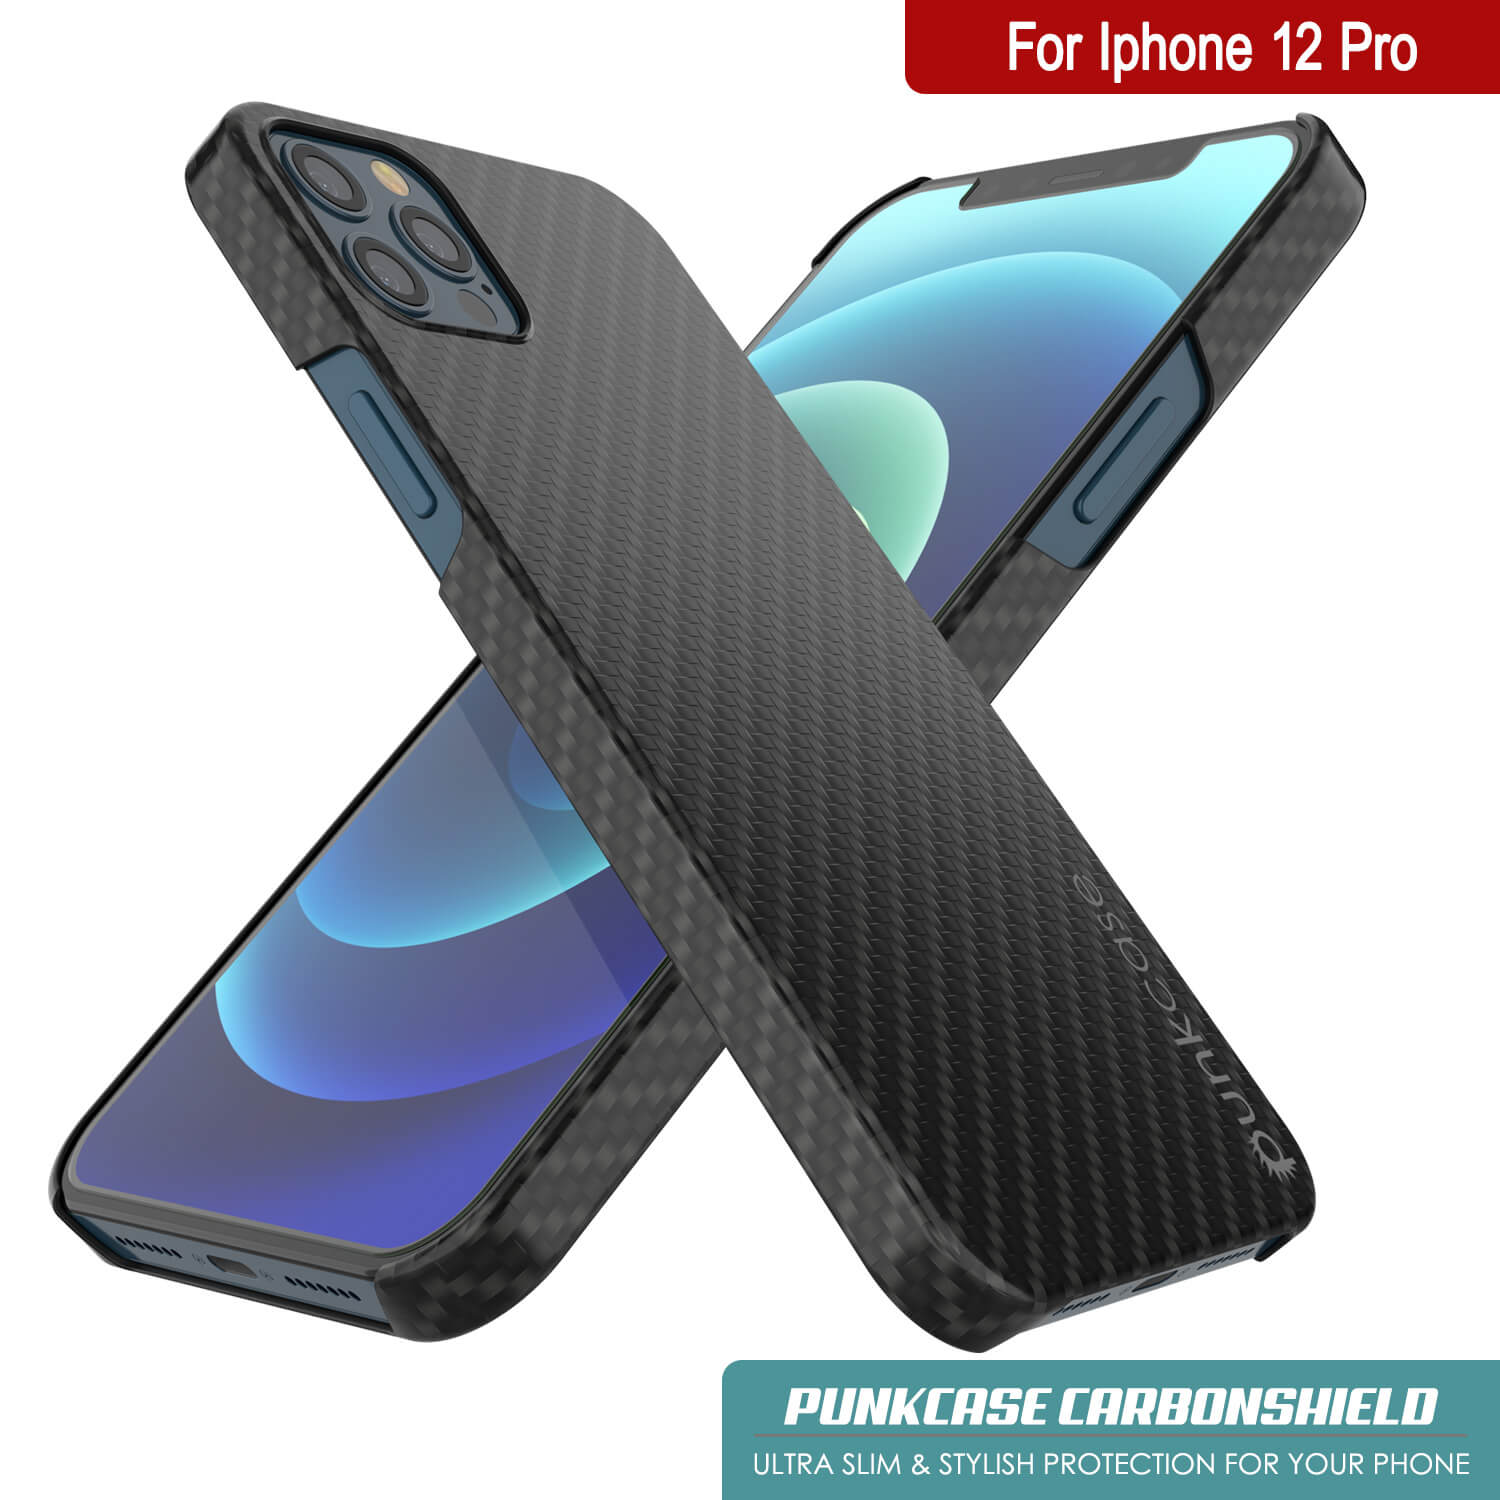 Ultra Thin iPhone 12 Pro Case - Wireless Charging Compatible – punkcase